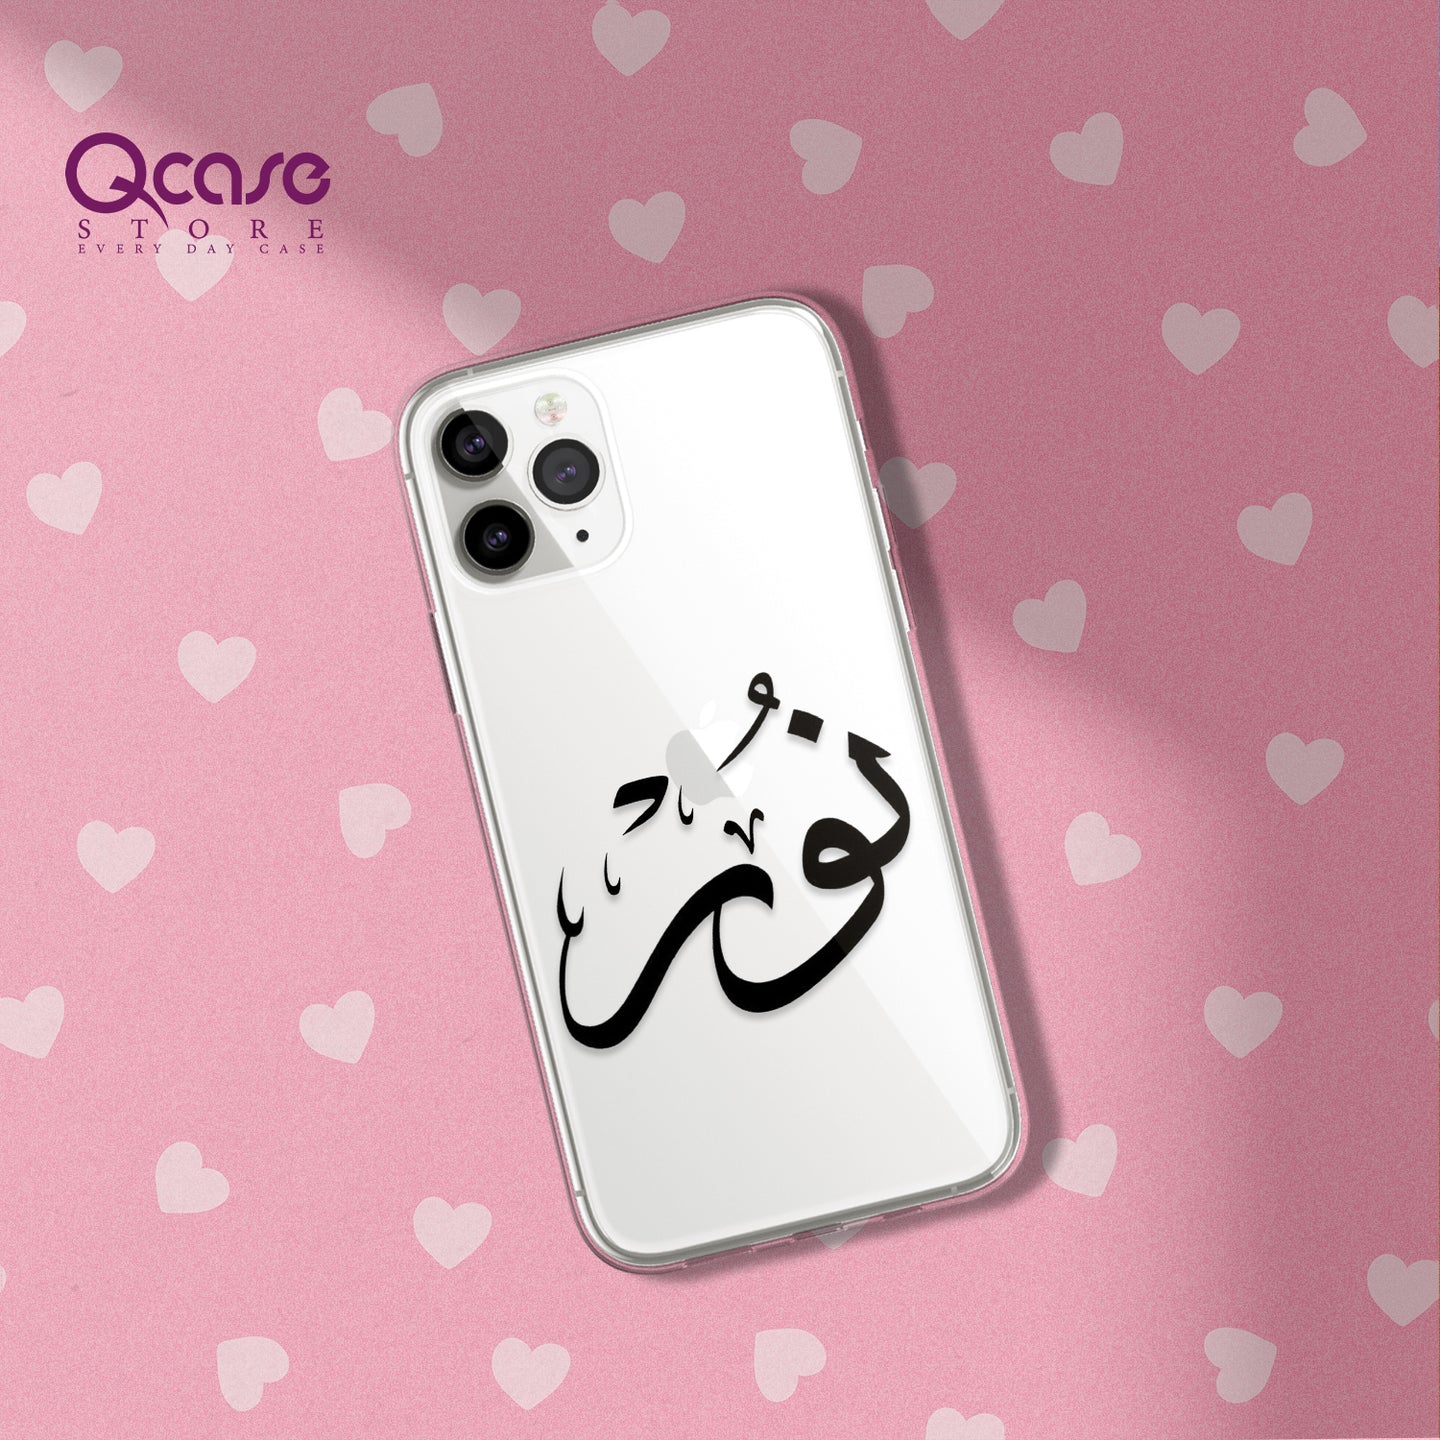 noor name phone cover